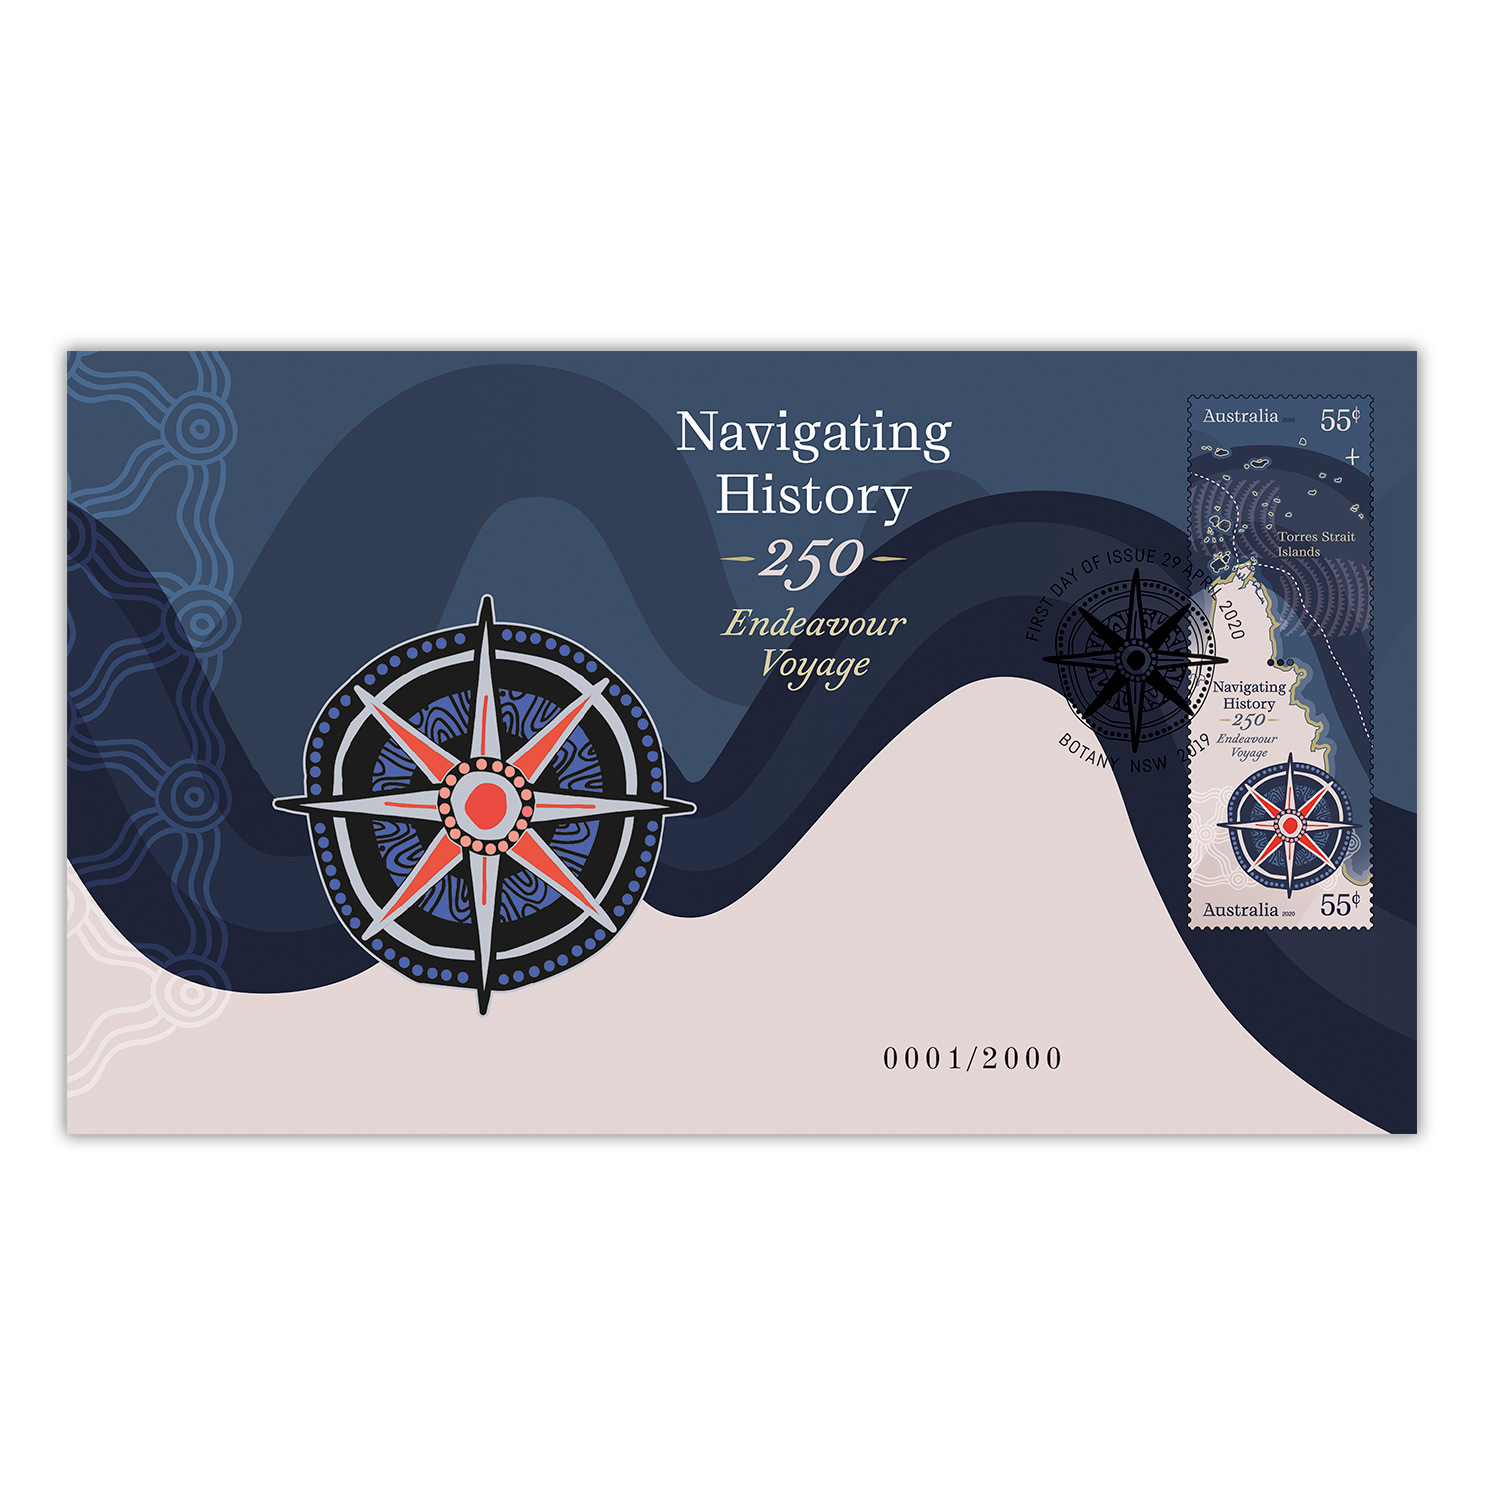 2020 Navigating History -  Endeavour Voyage 250 Years Medallion Cover